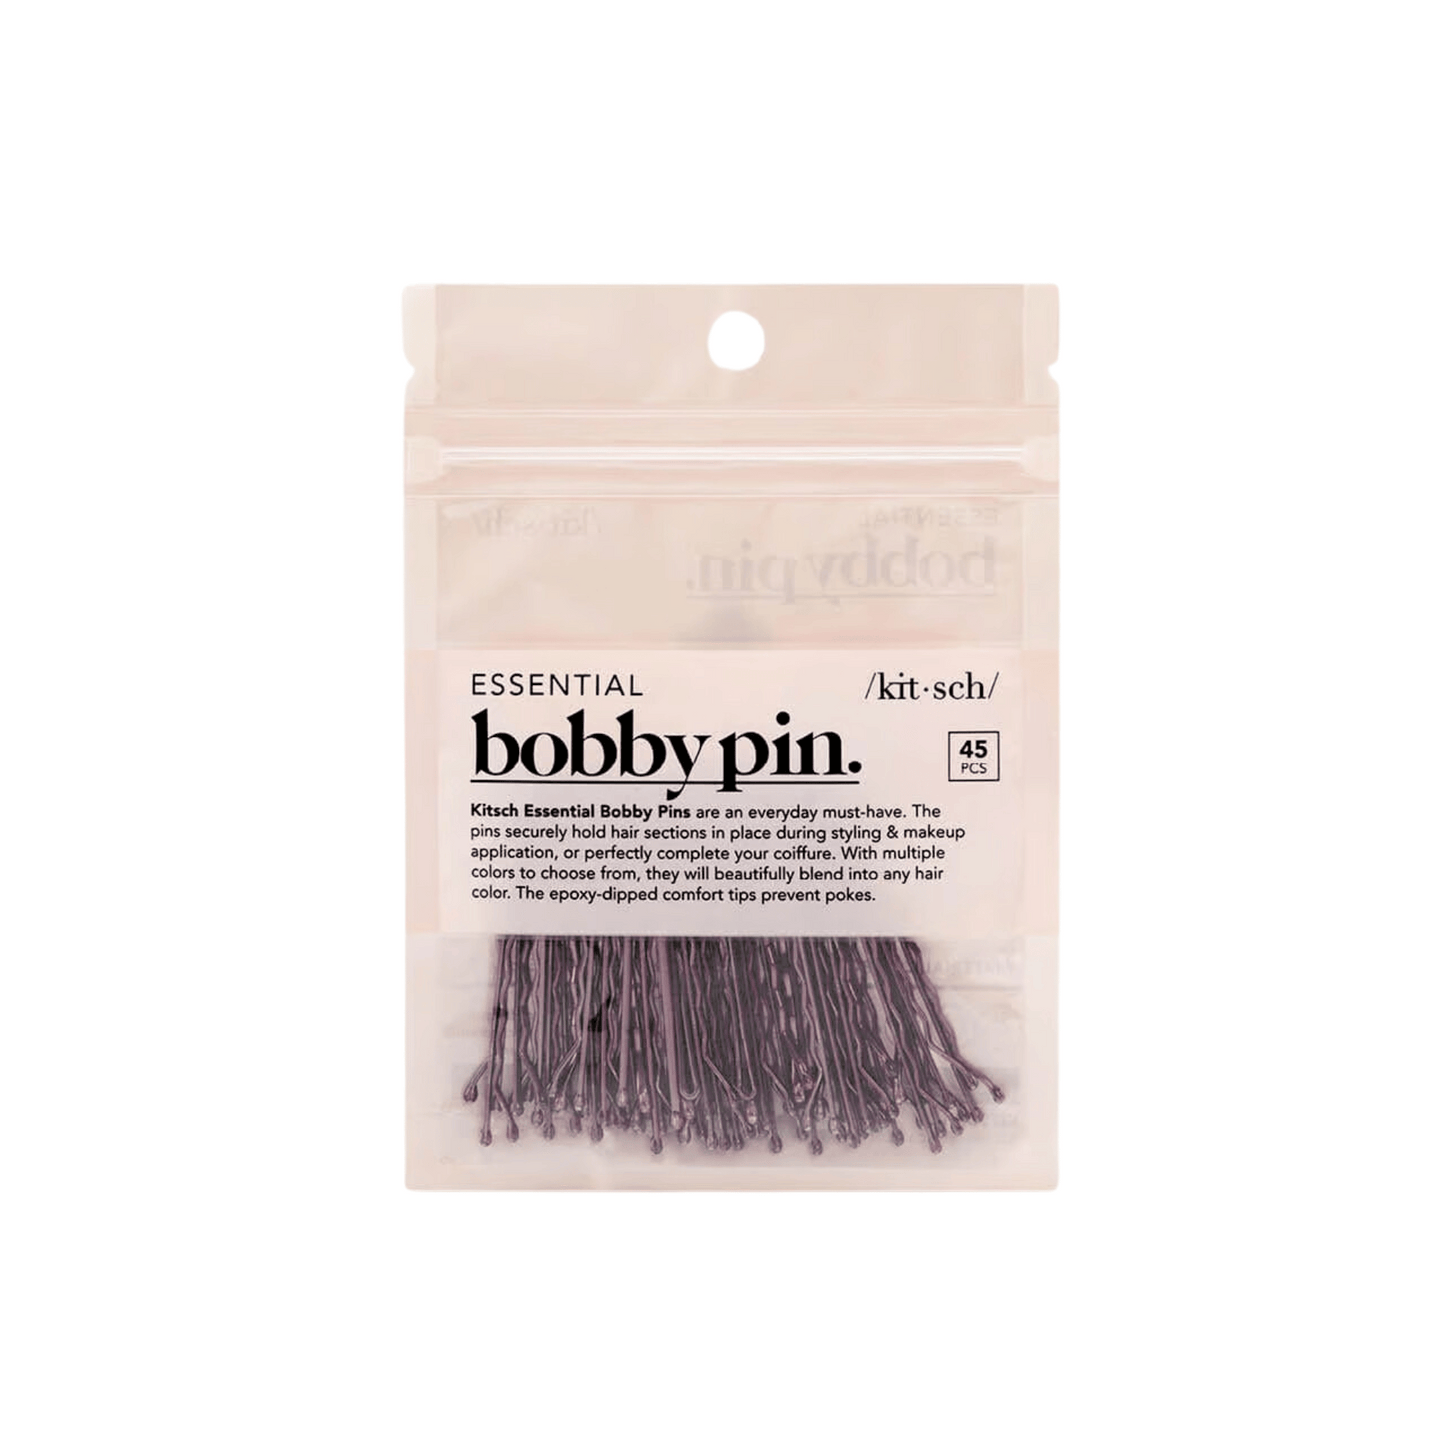 Primary Image of Brown Bobby Pins